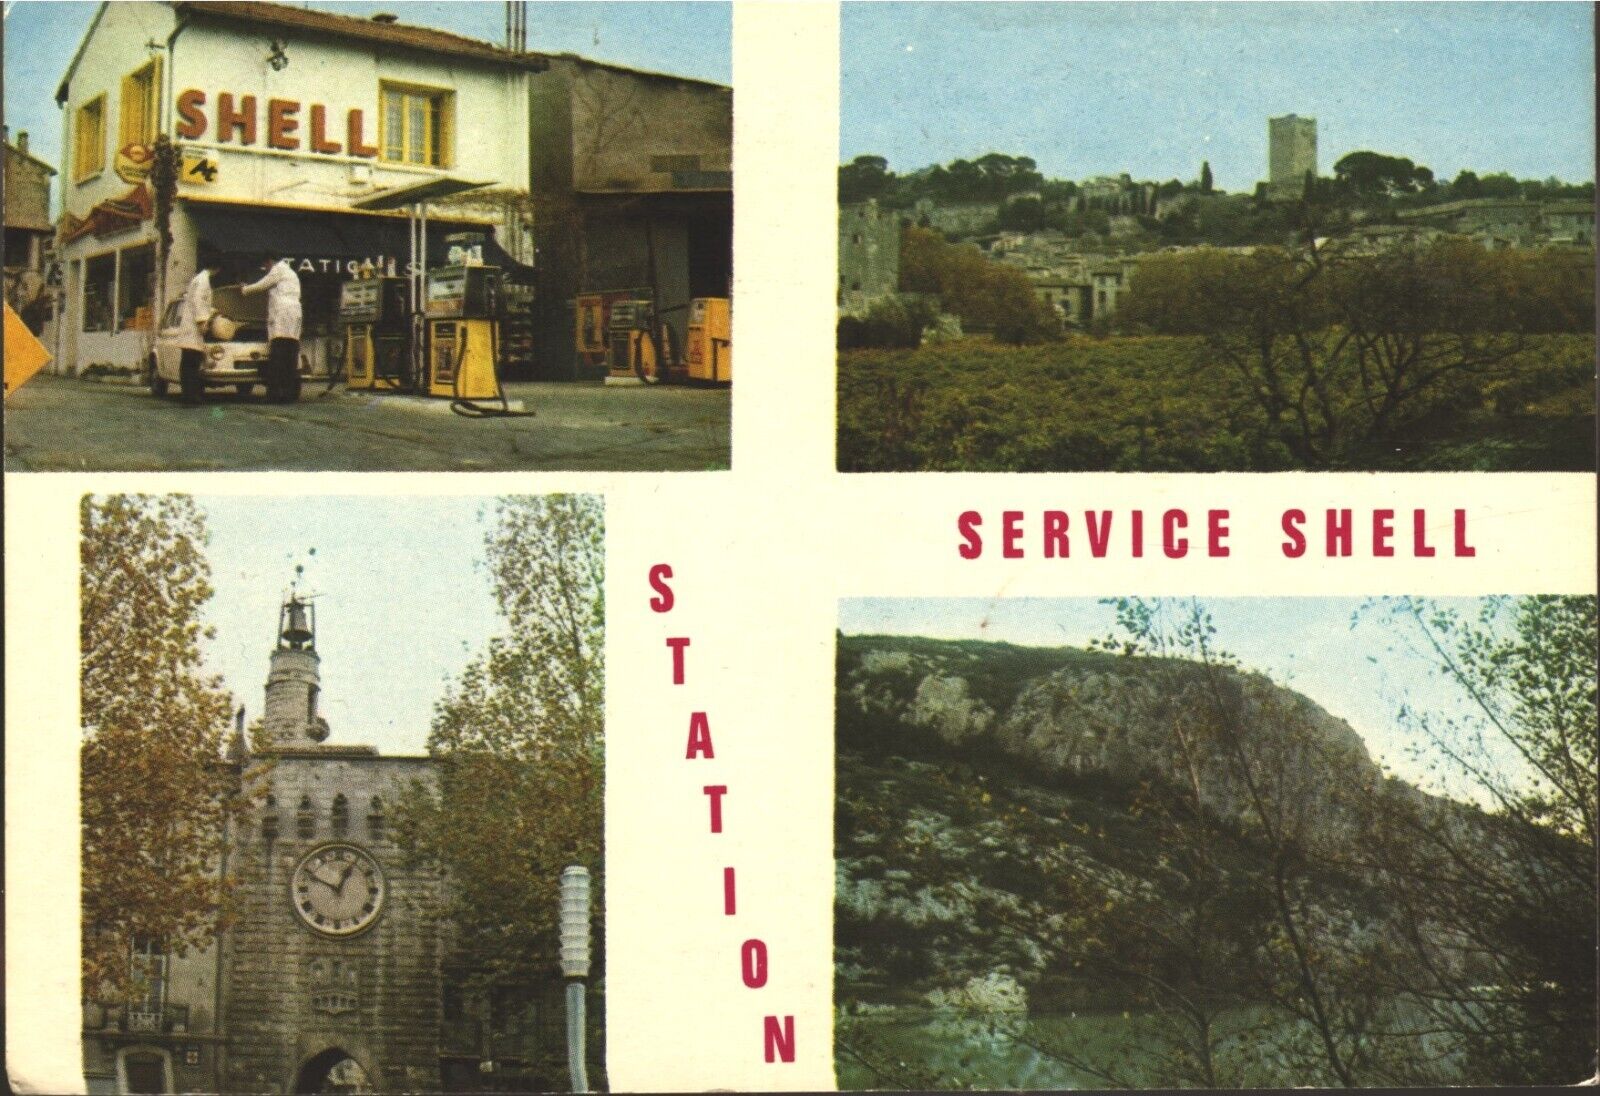 SOMS 30 service station SCHELL manager Mr and Mrs CHÂTELAIN CPSM circa 1970